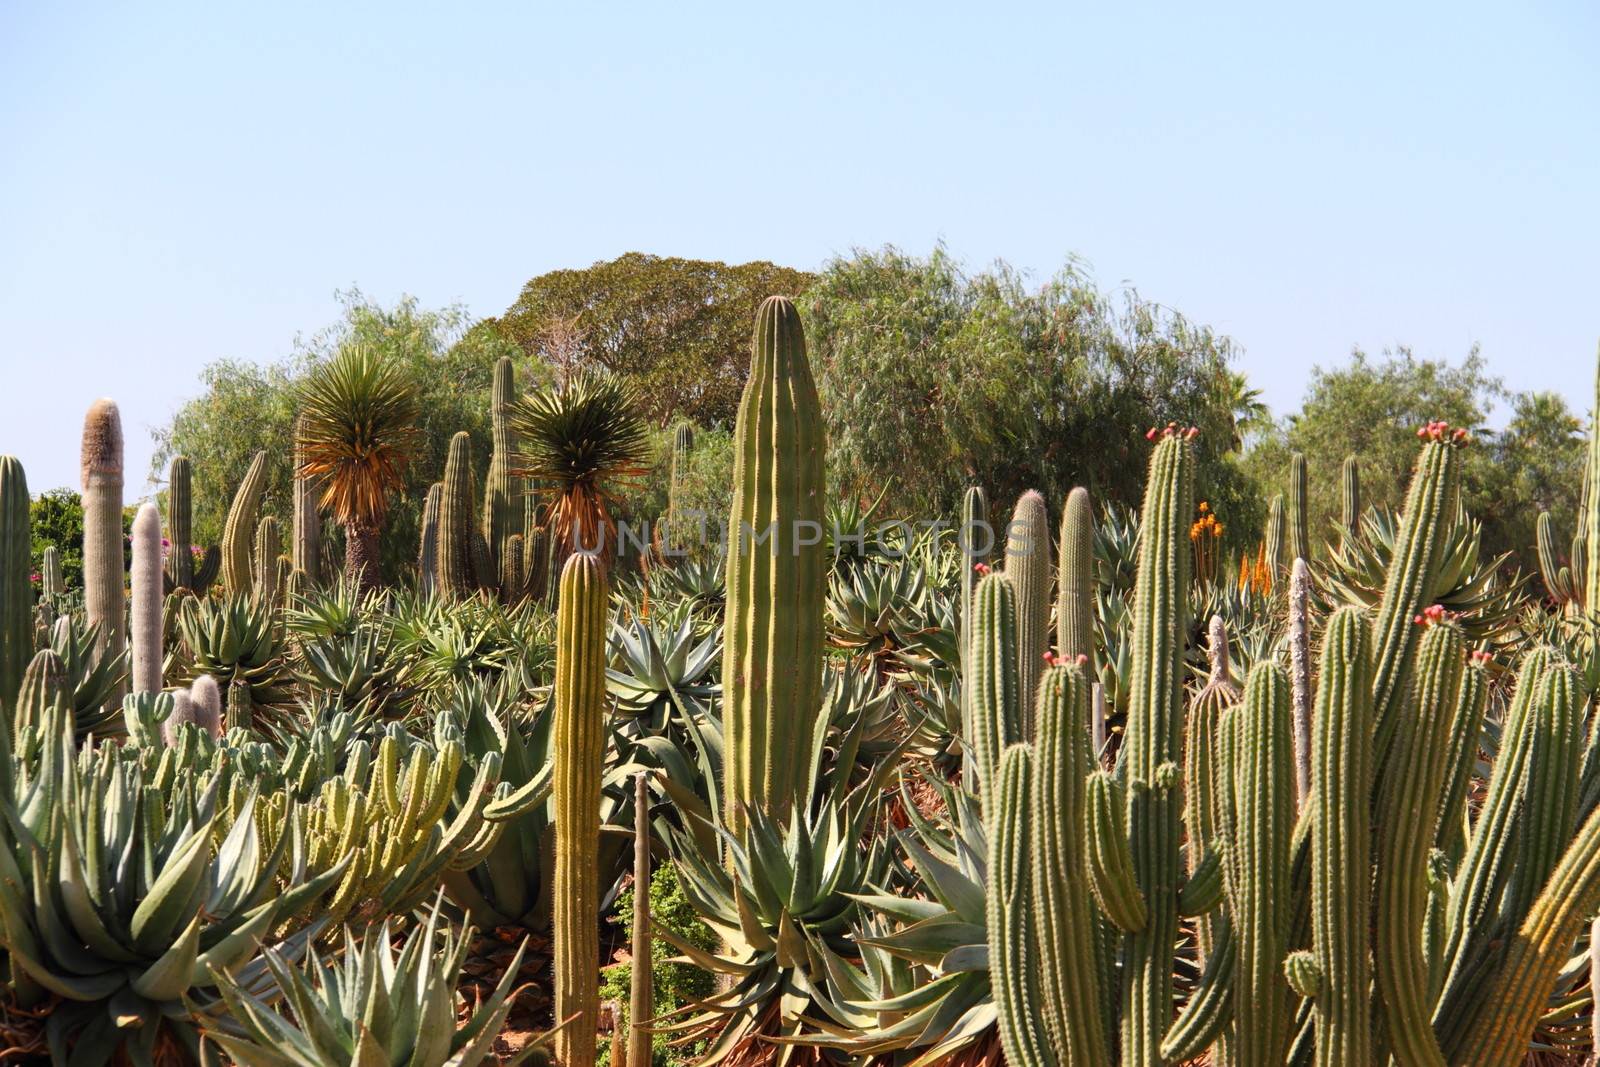 Cacti at Bontanicactus,Ses Selines, Mallorca, Spain by mitzy